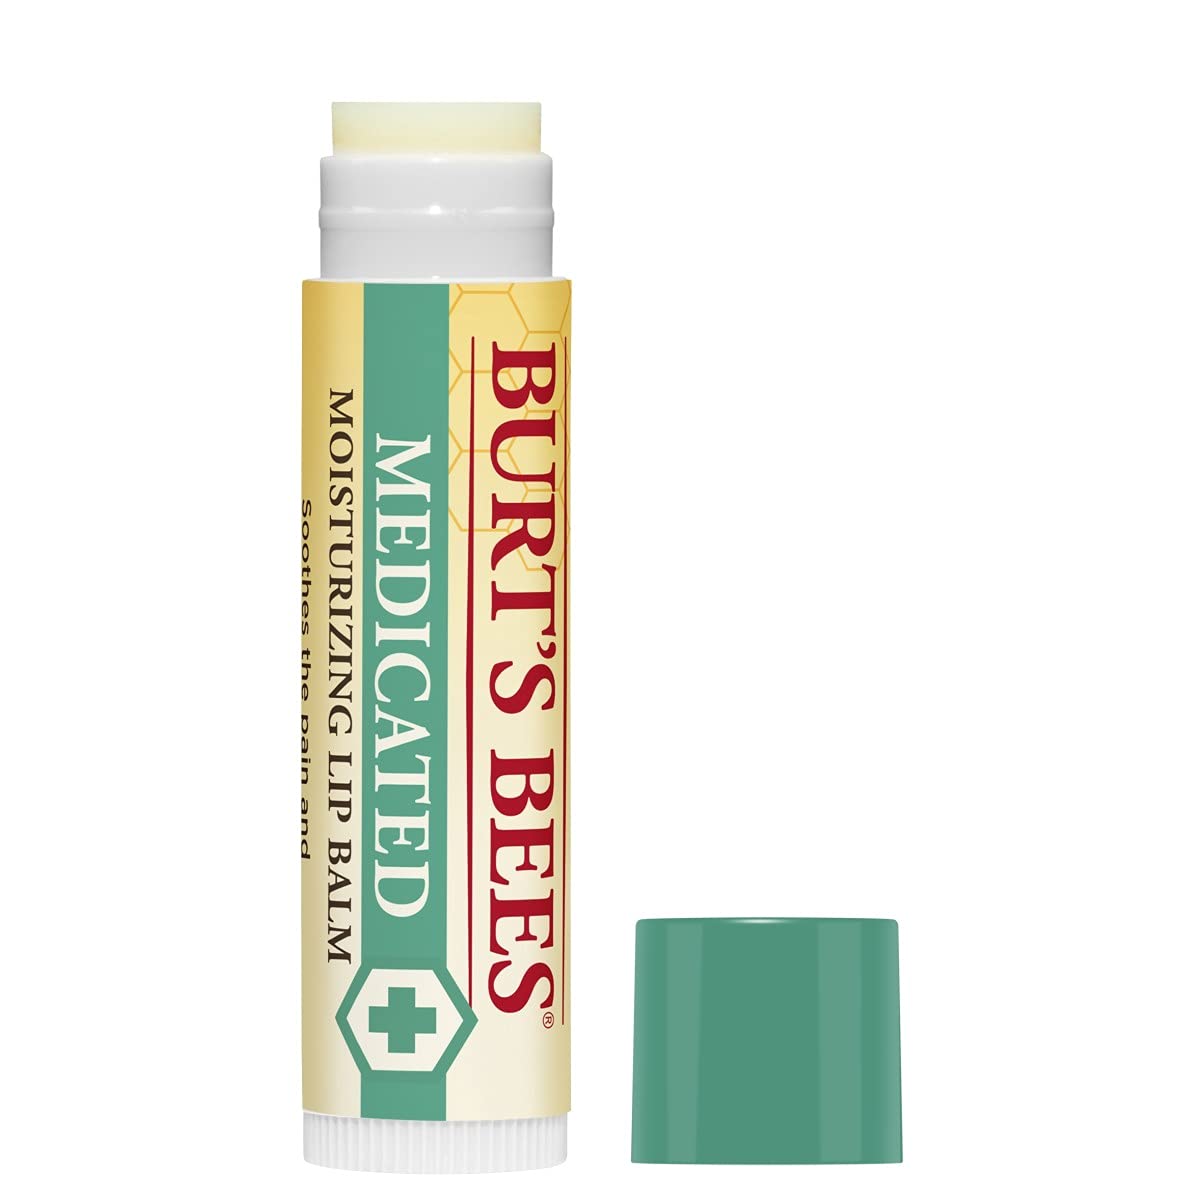 Burt's Bees Lip Balm, Moisturizing Lip Care for All Day Hydration, for Dry Chapped Lips, All Natural, Medicated with Menthol & Eucalyptus (2 Pack)